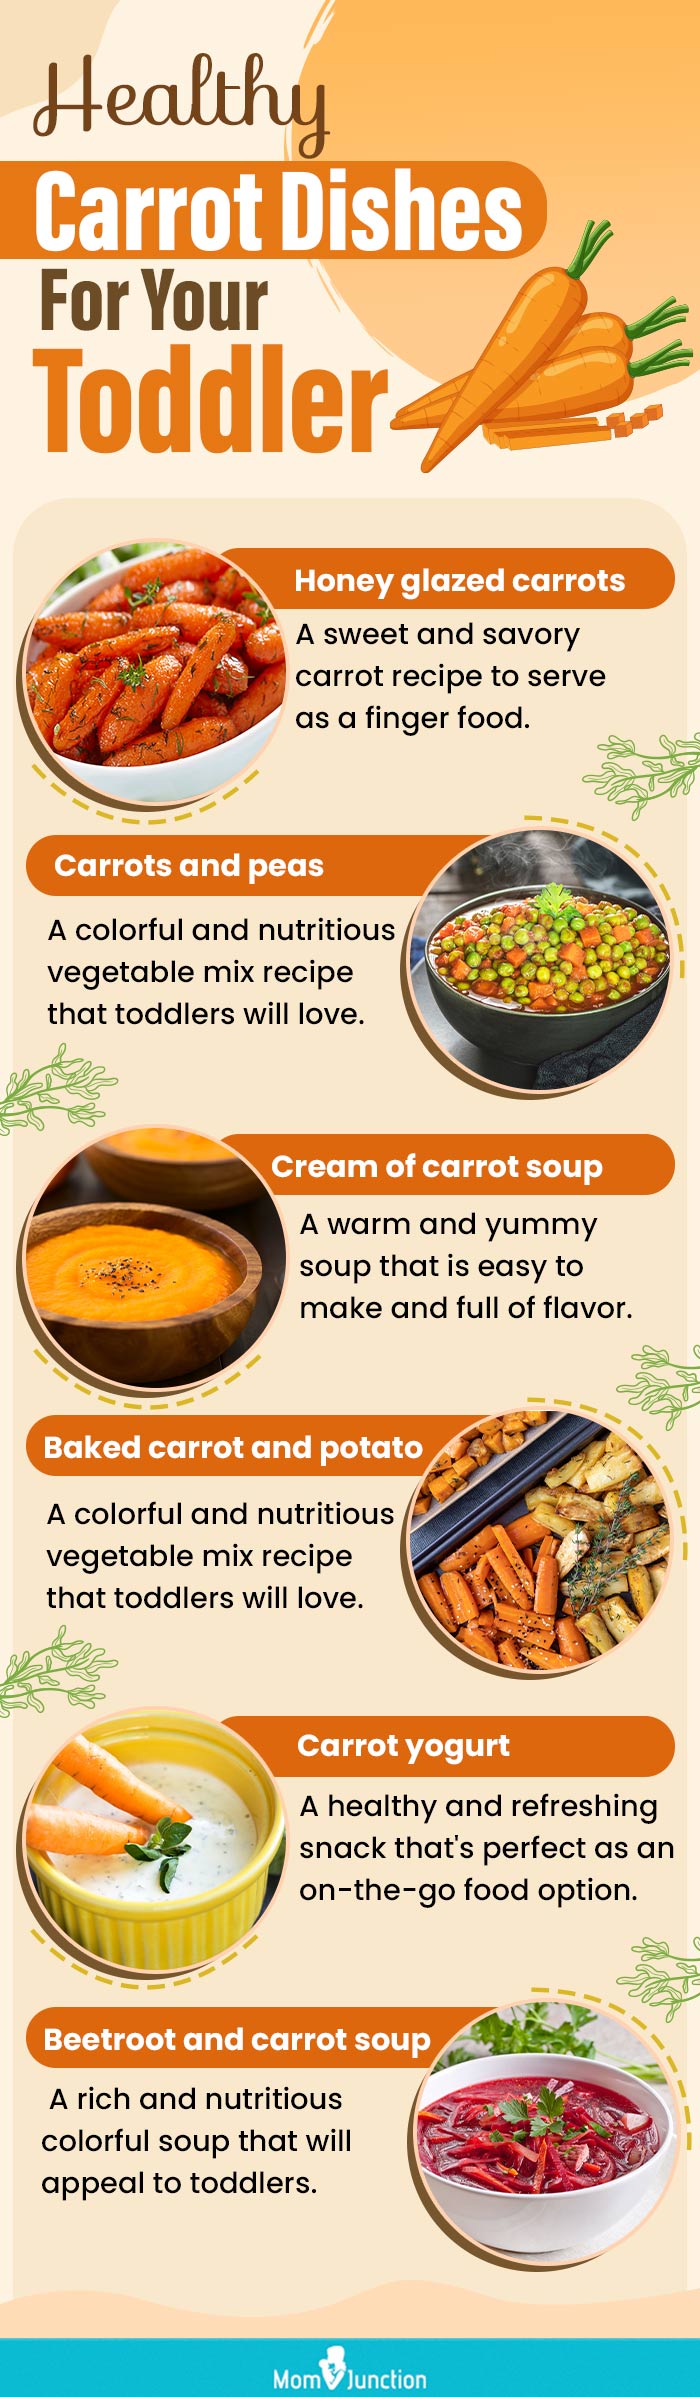 healthy carrot dishes for your toddler (infographic)